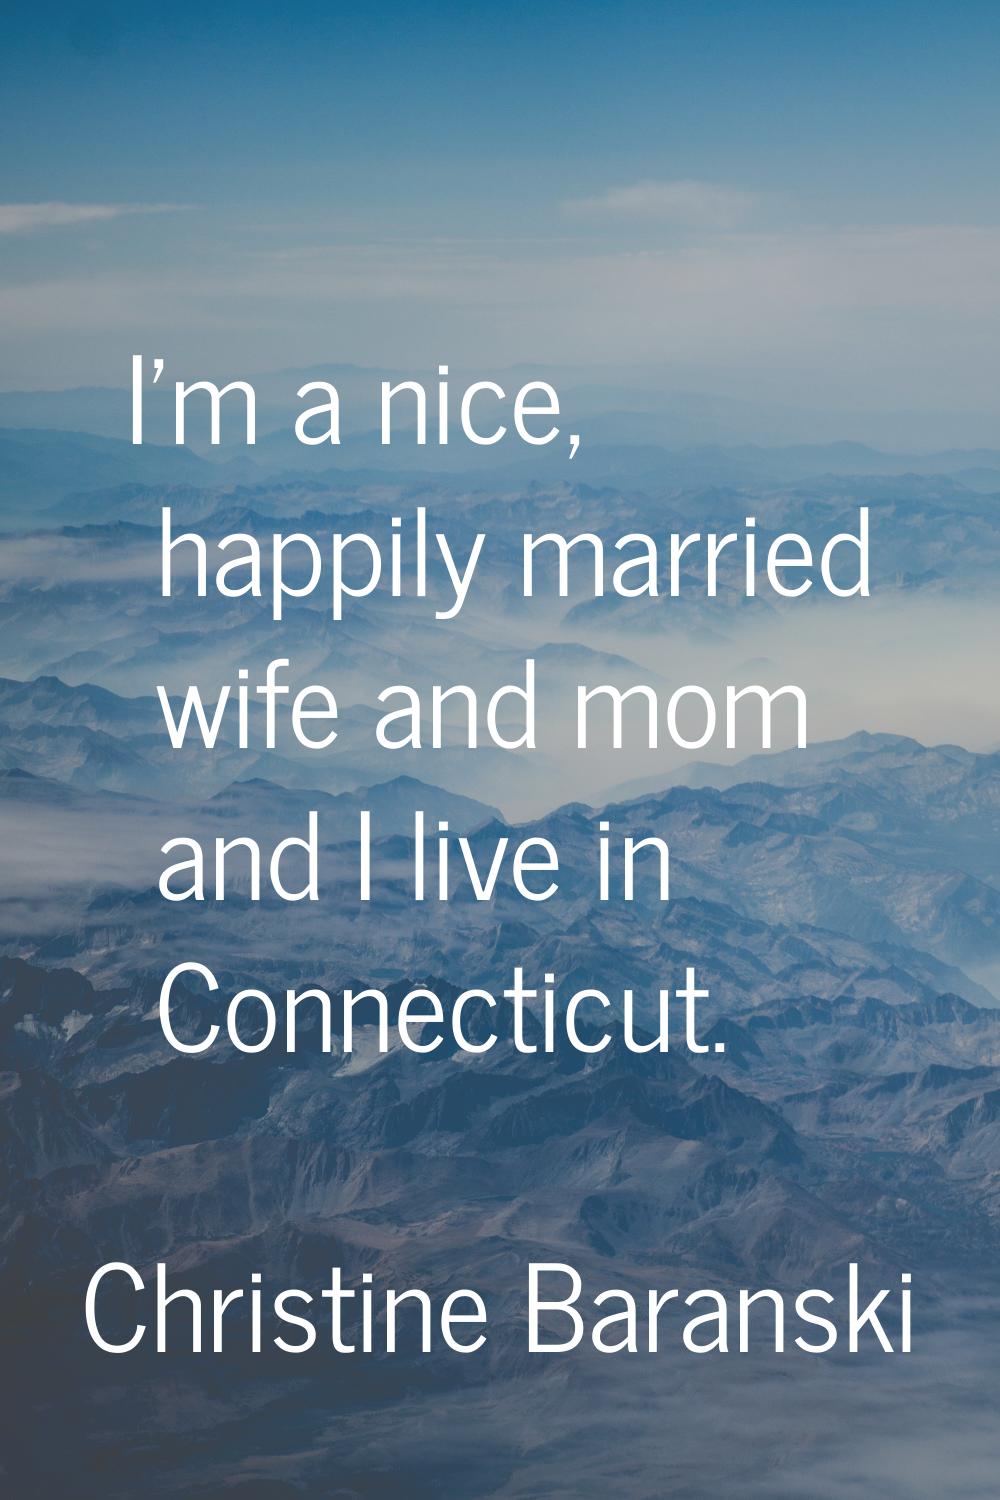 I'm a nice, happily married wife and mom and I live in Connecticut.